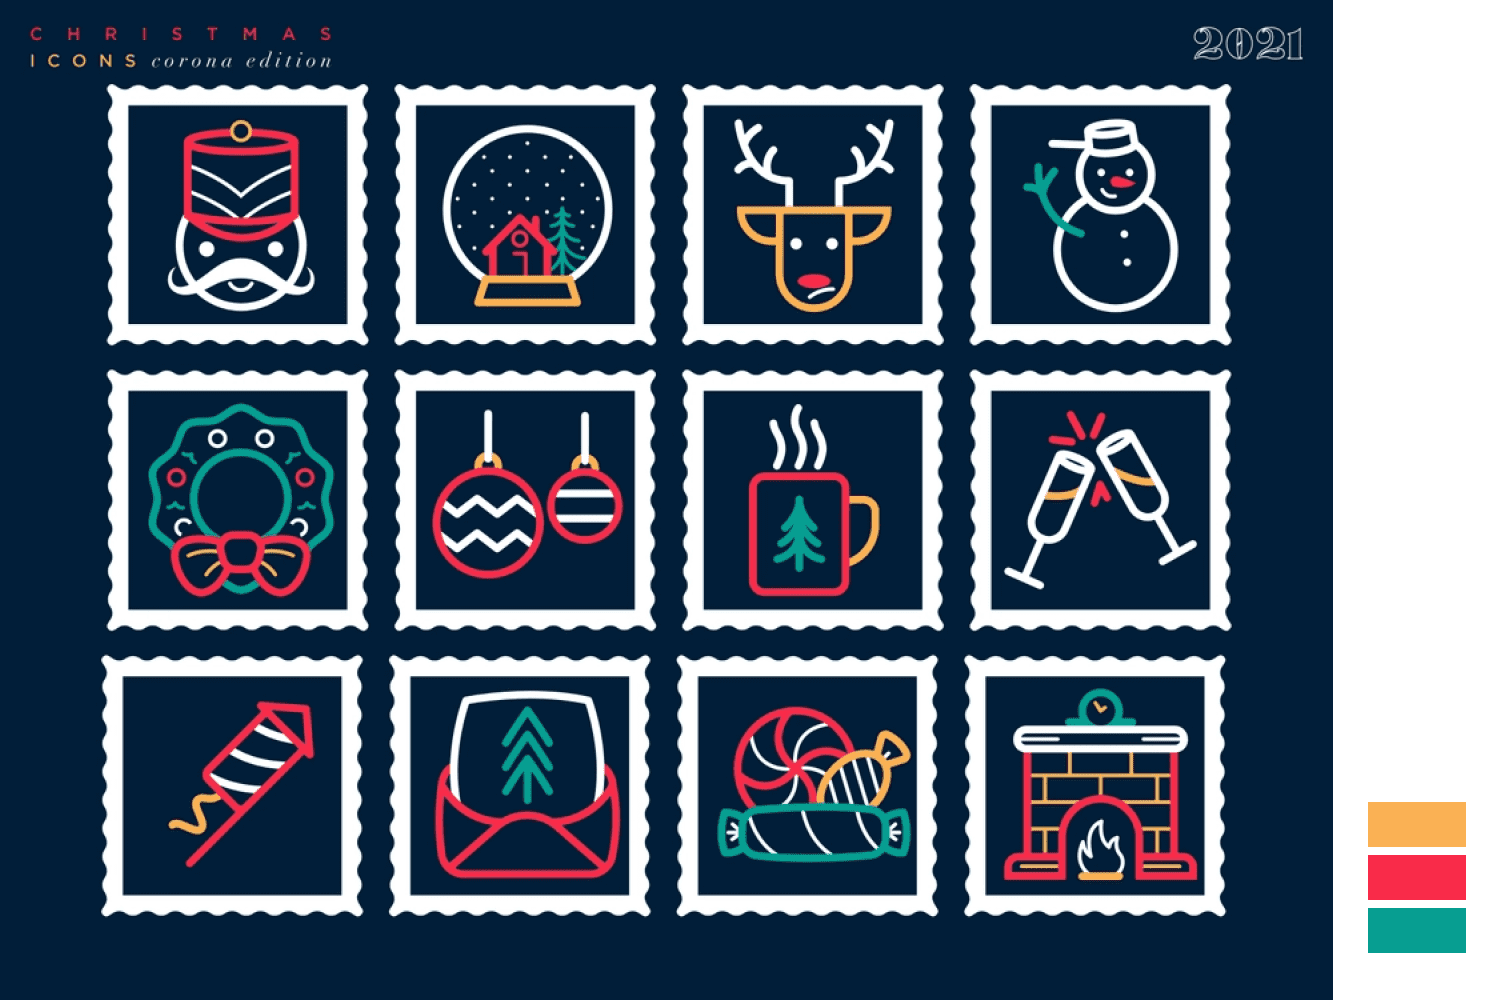 Collage with classic and modern Xmas styles icons.